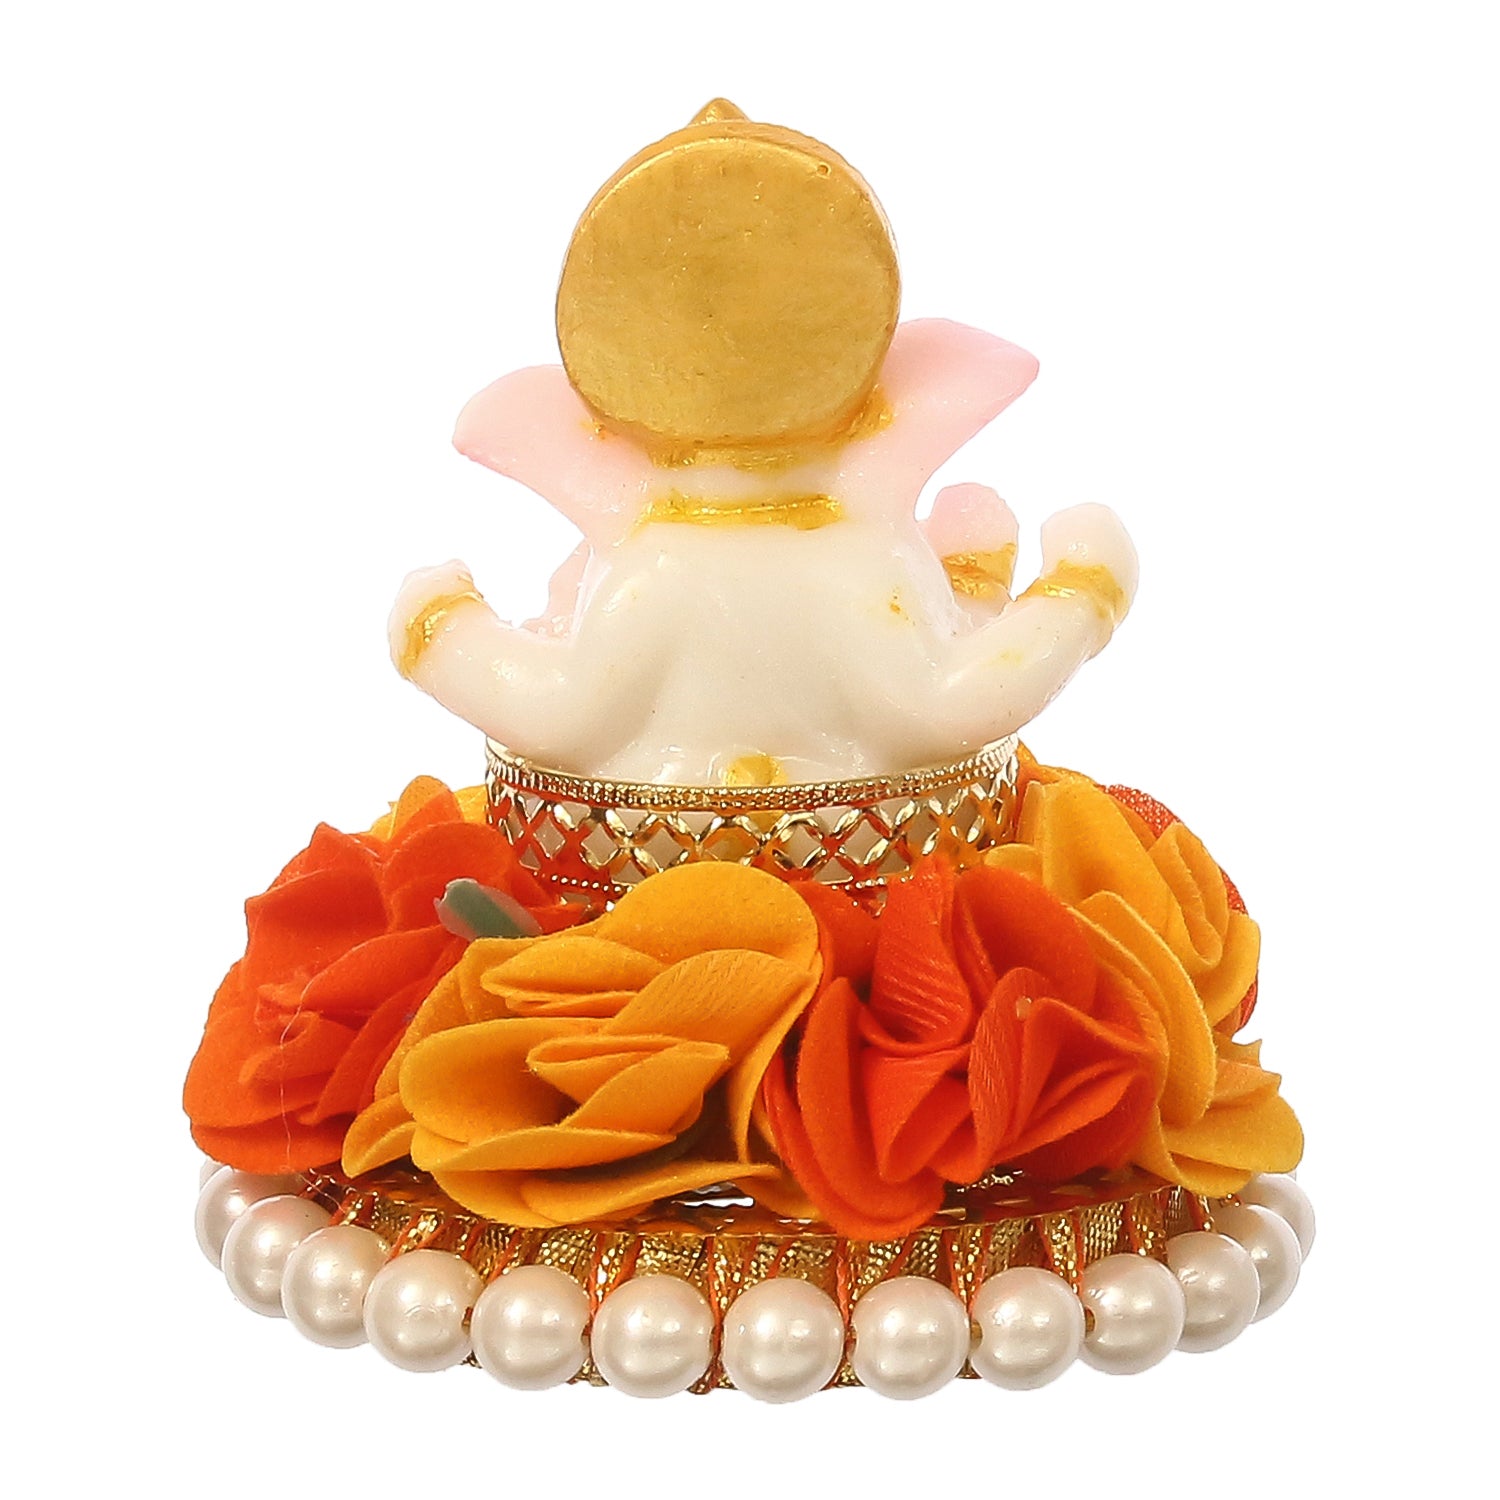 Lord Ganesha Idol On Decorative Handcrafted Orange And Yellow Flowers Plate 6